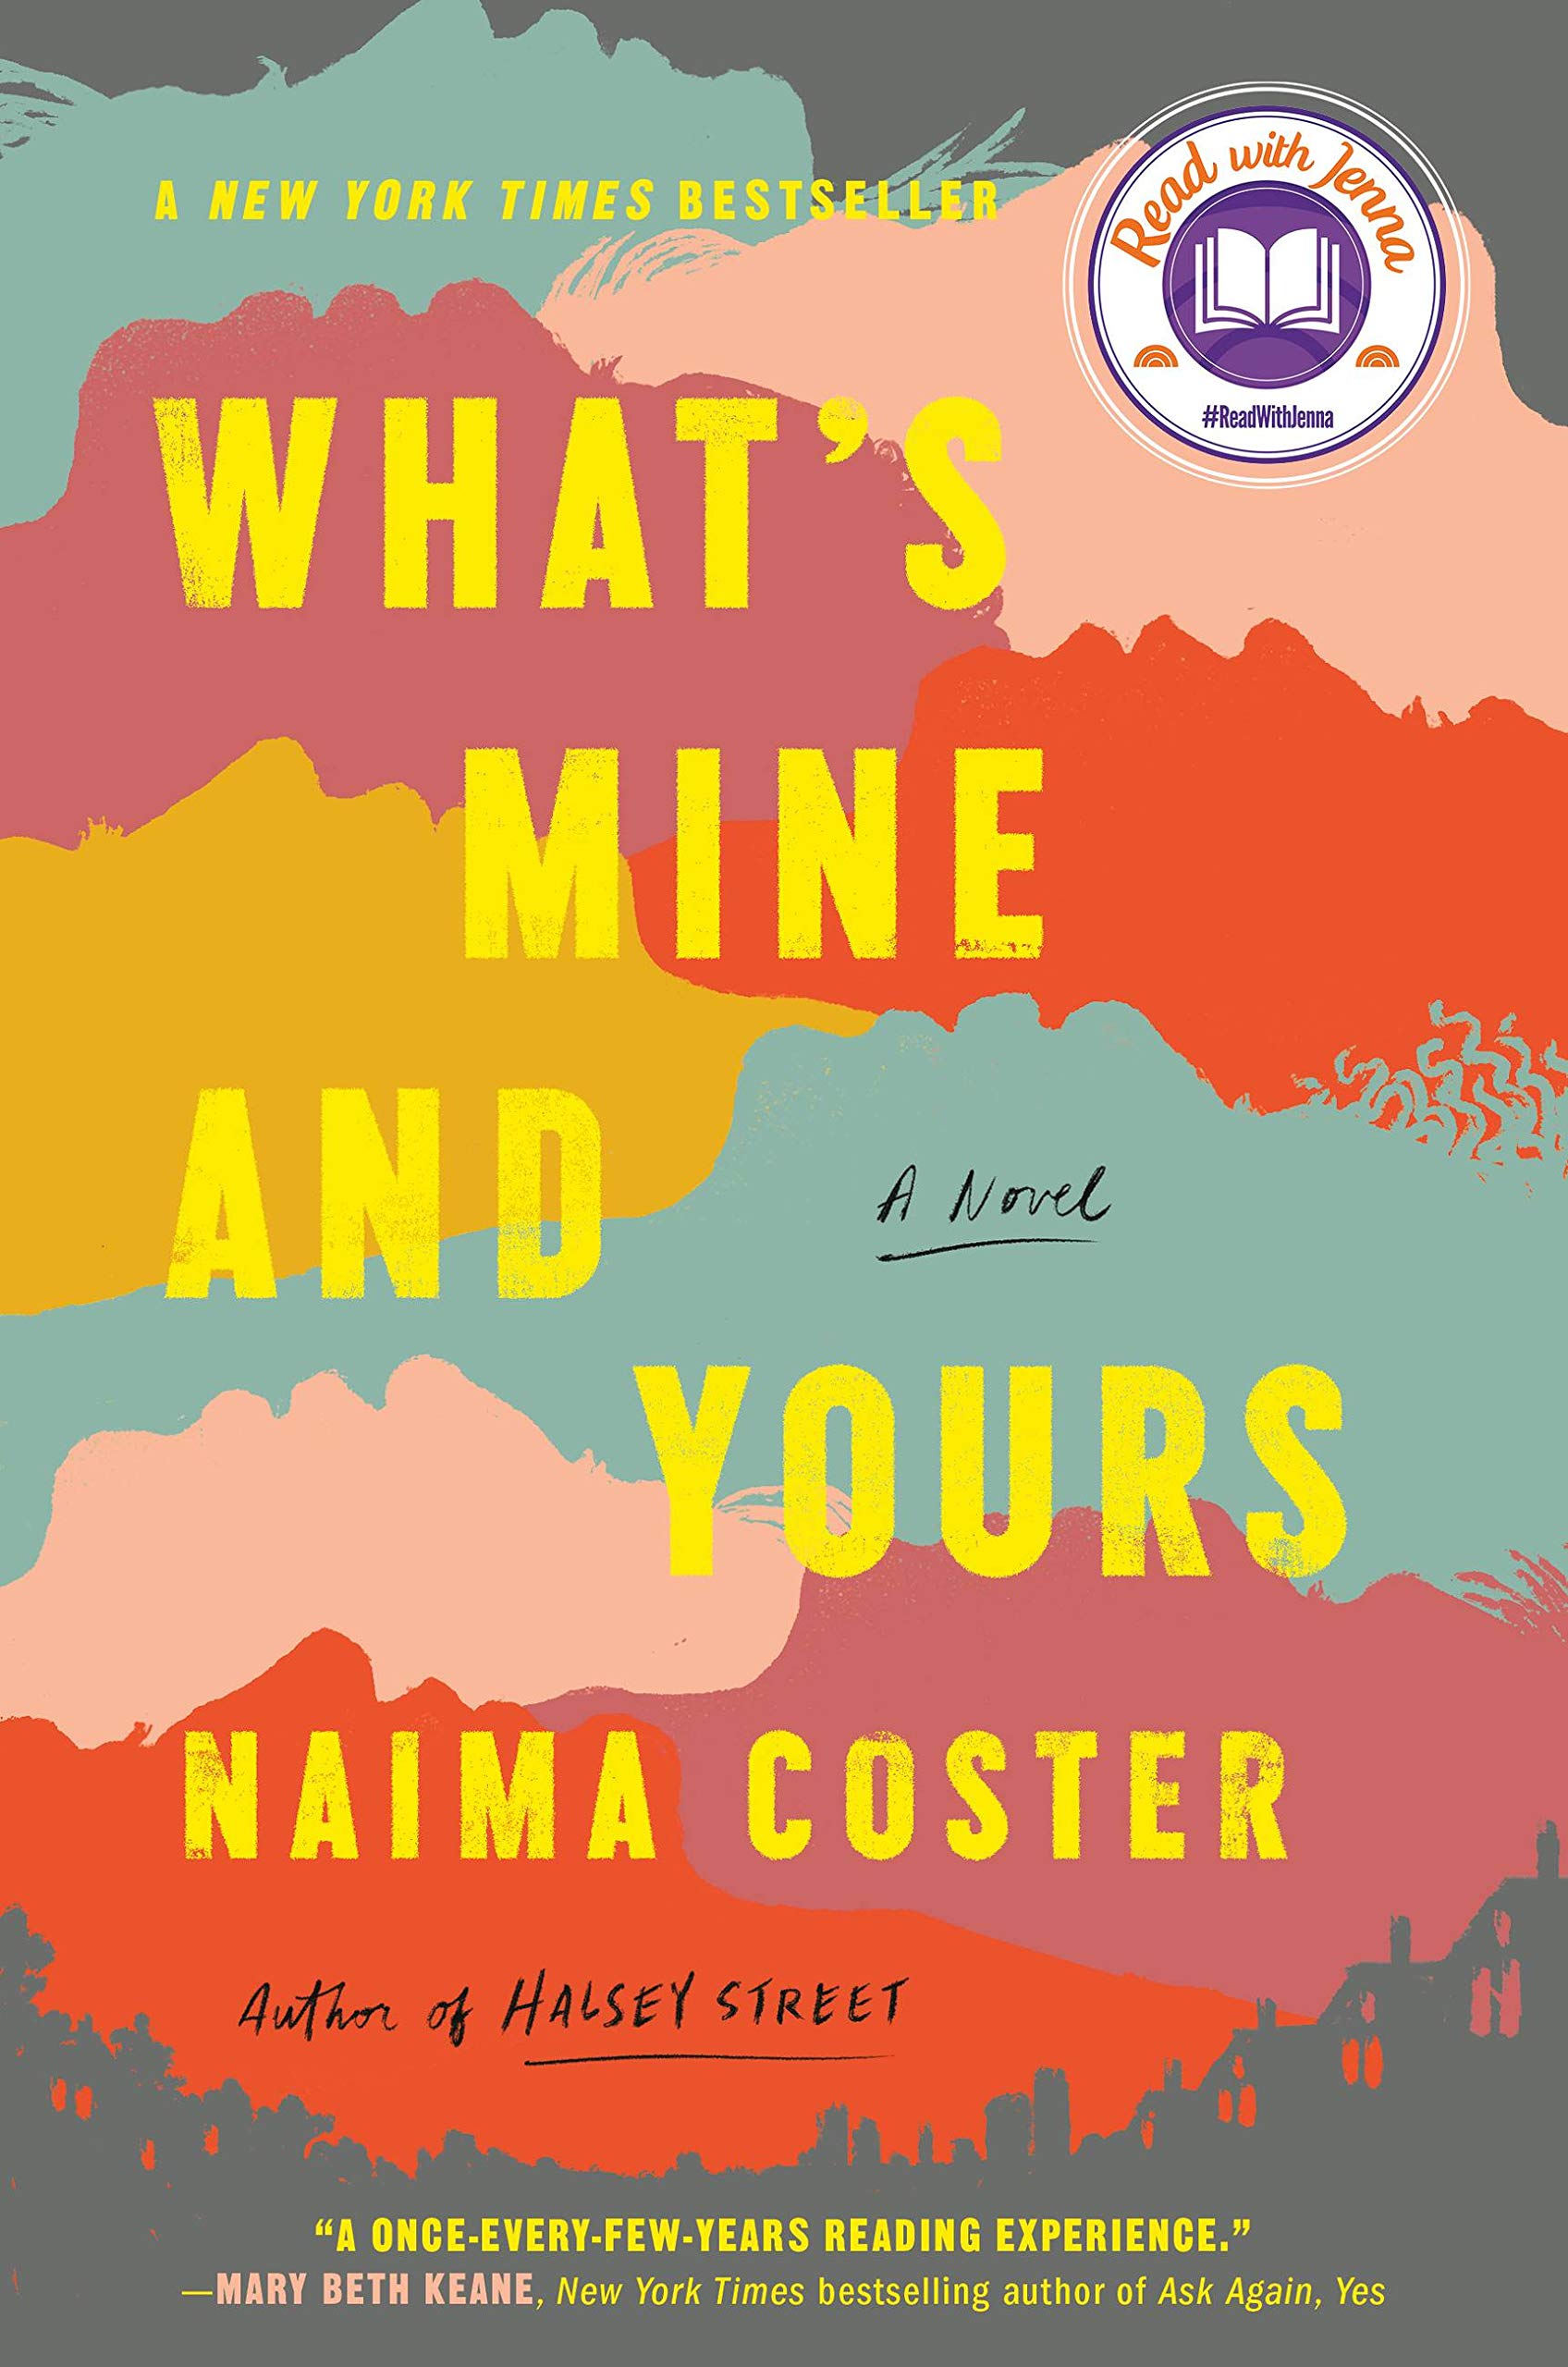 Book cover of What's Mine and Yours, by Naima Coster